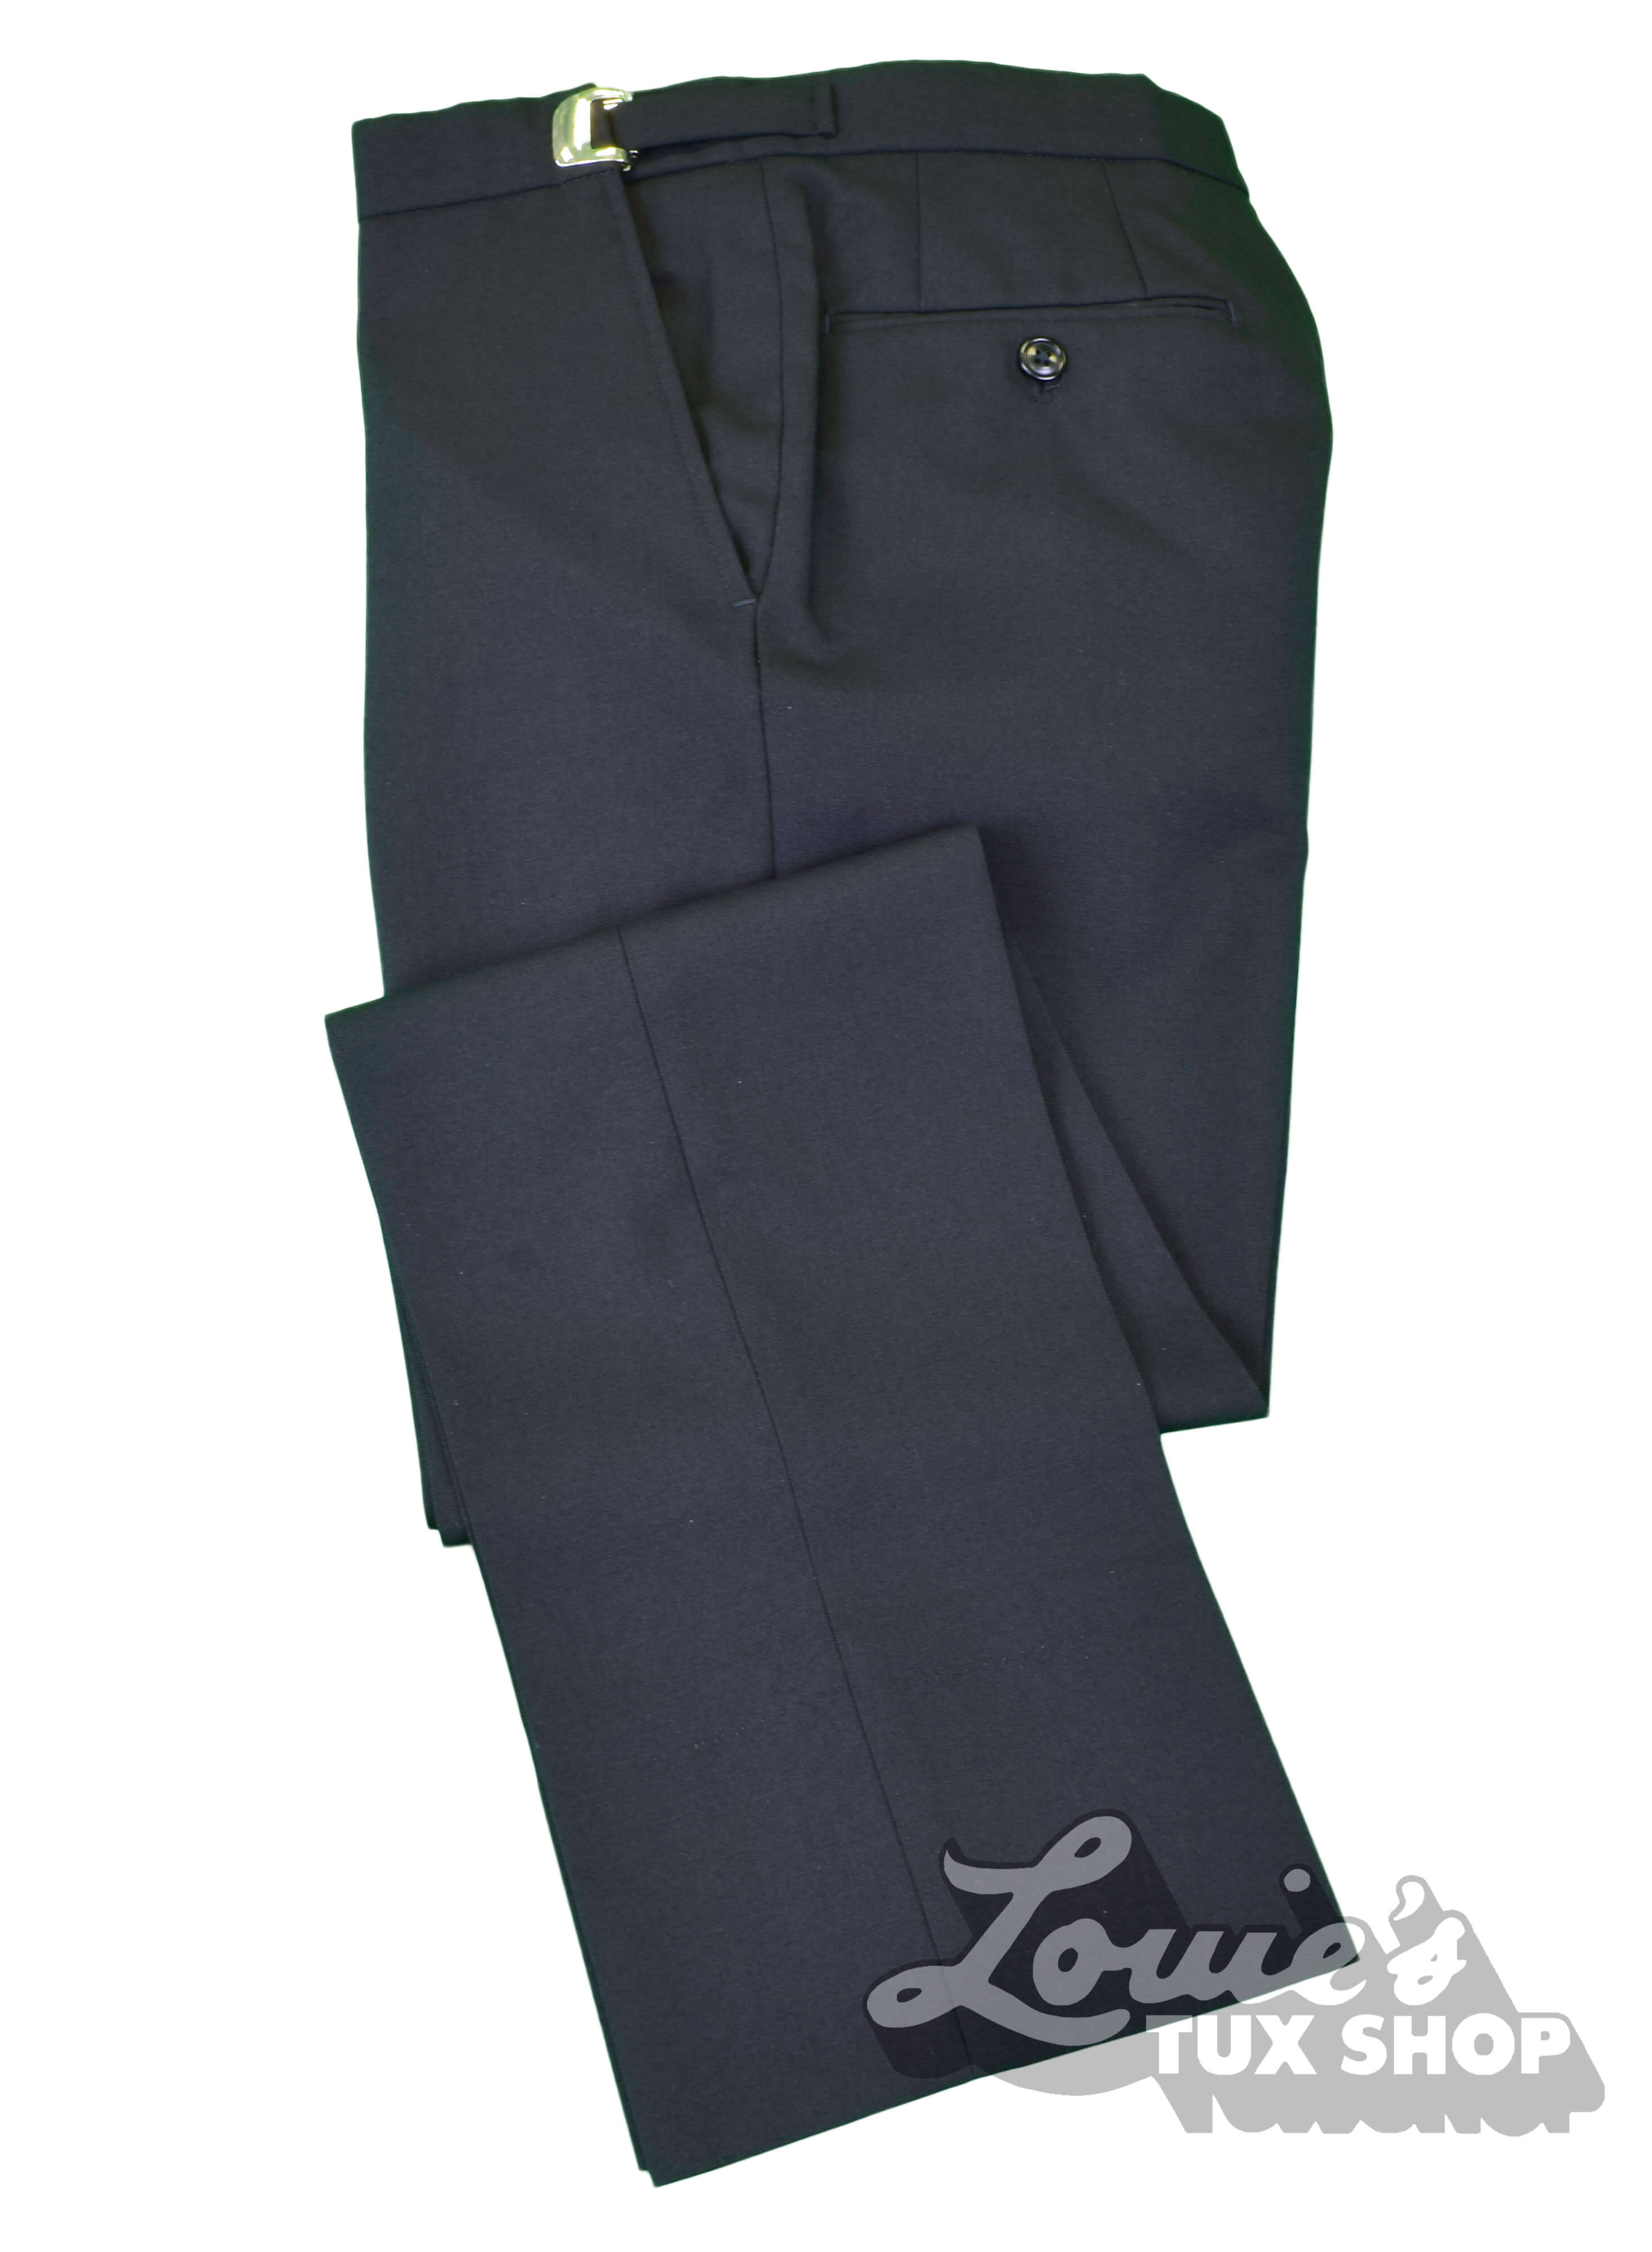 Tall Men's Mid Grey Suit Trousers | American Tall